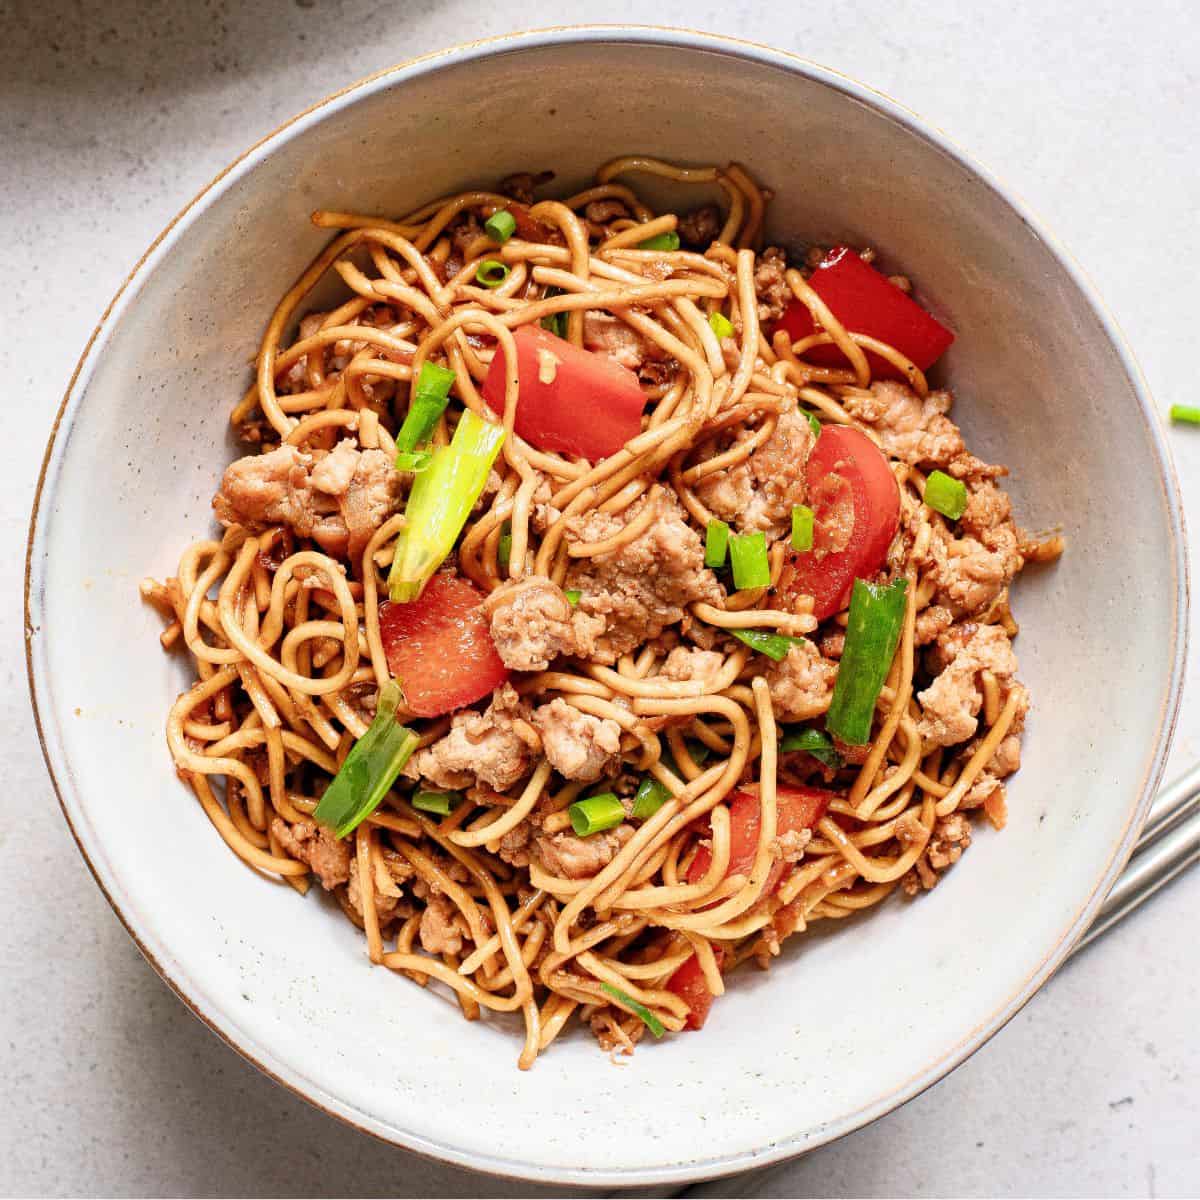 A bowl of Asian noodles with pork, peppers and green onions in a teriyaki sauce.